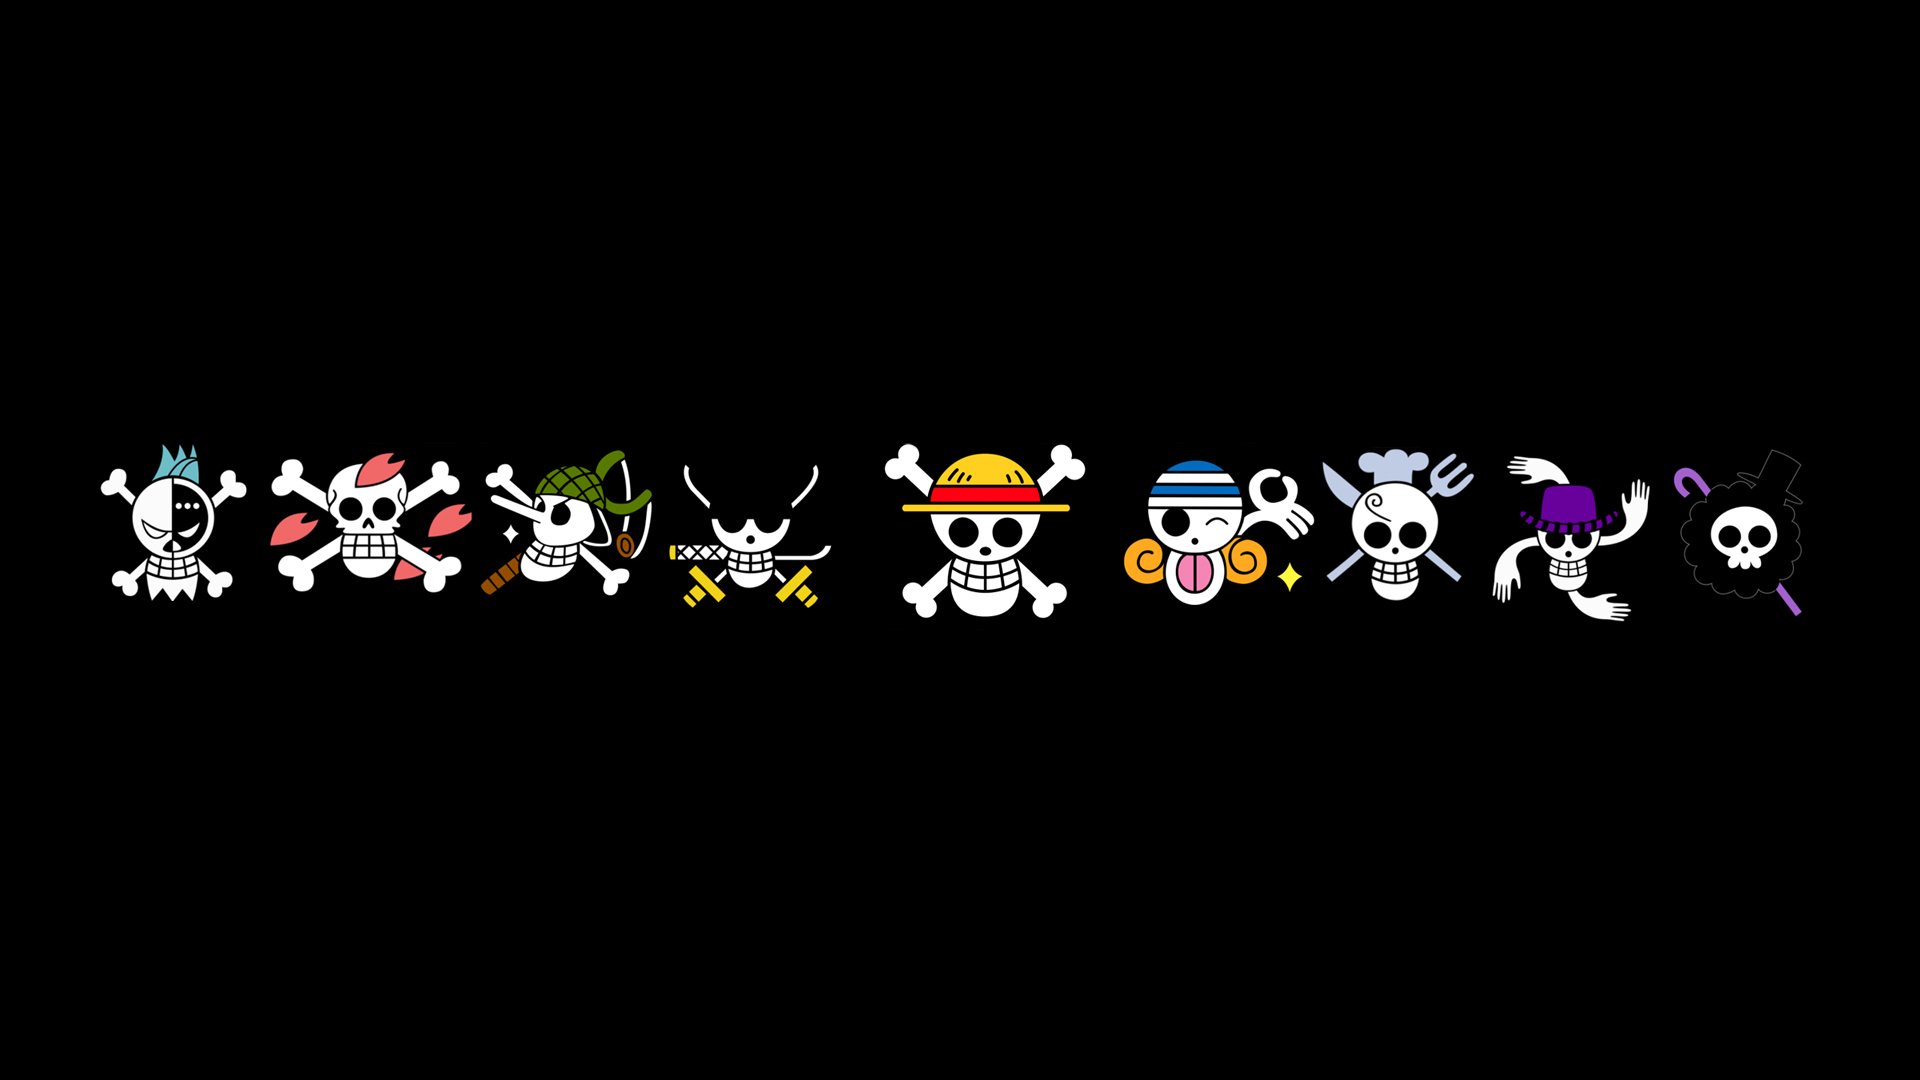 One Piece Pirates Logo Wallpapers HD 1920x1080